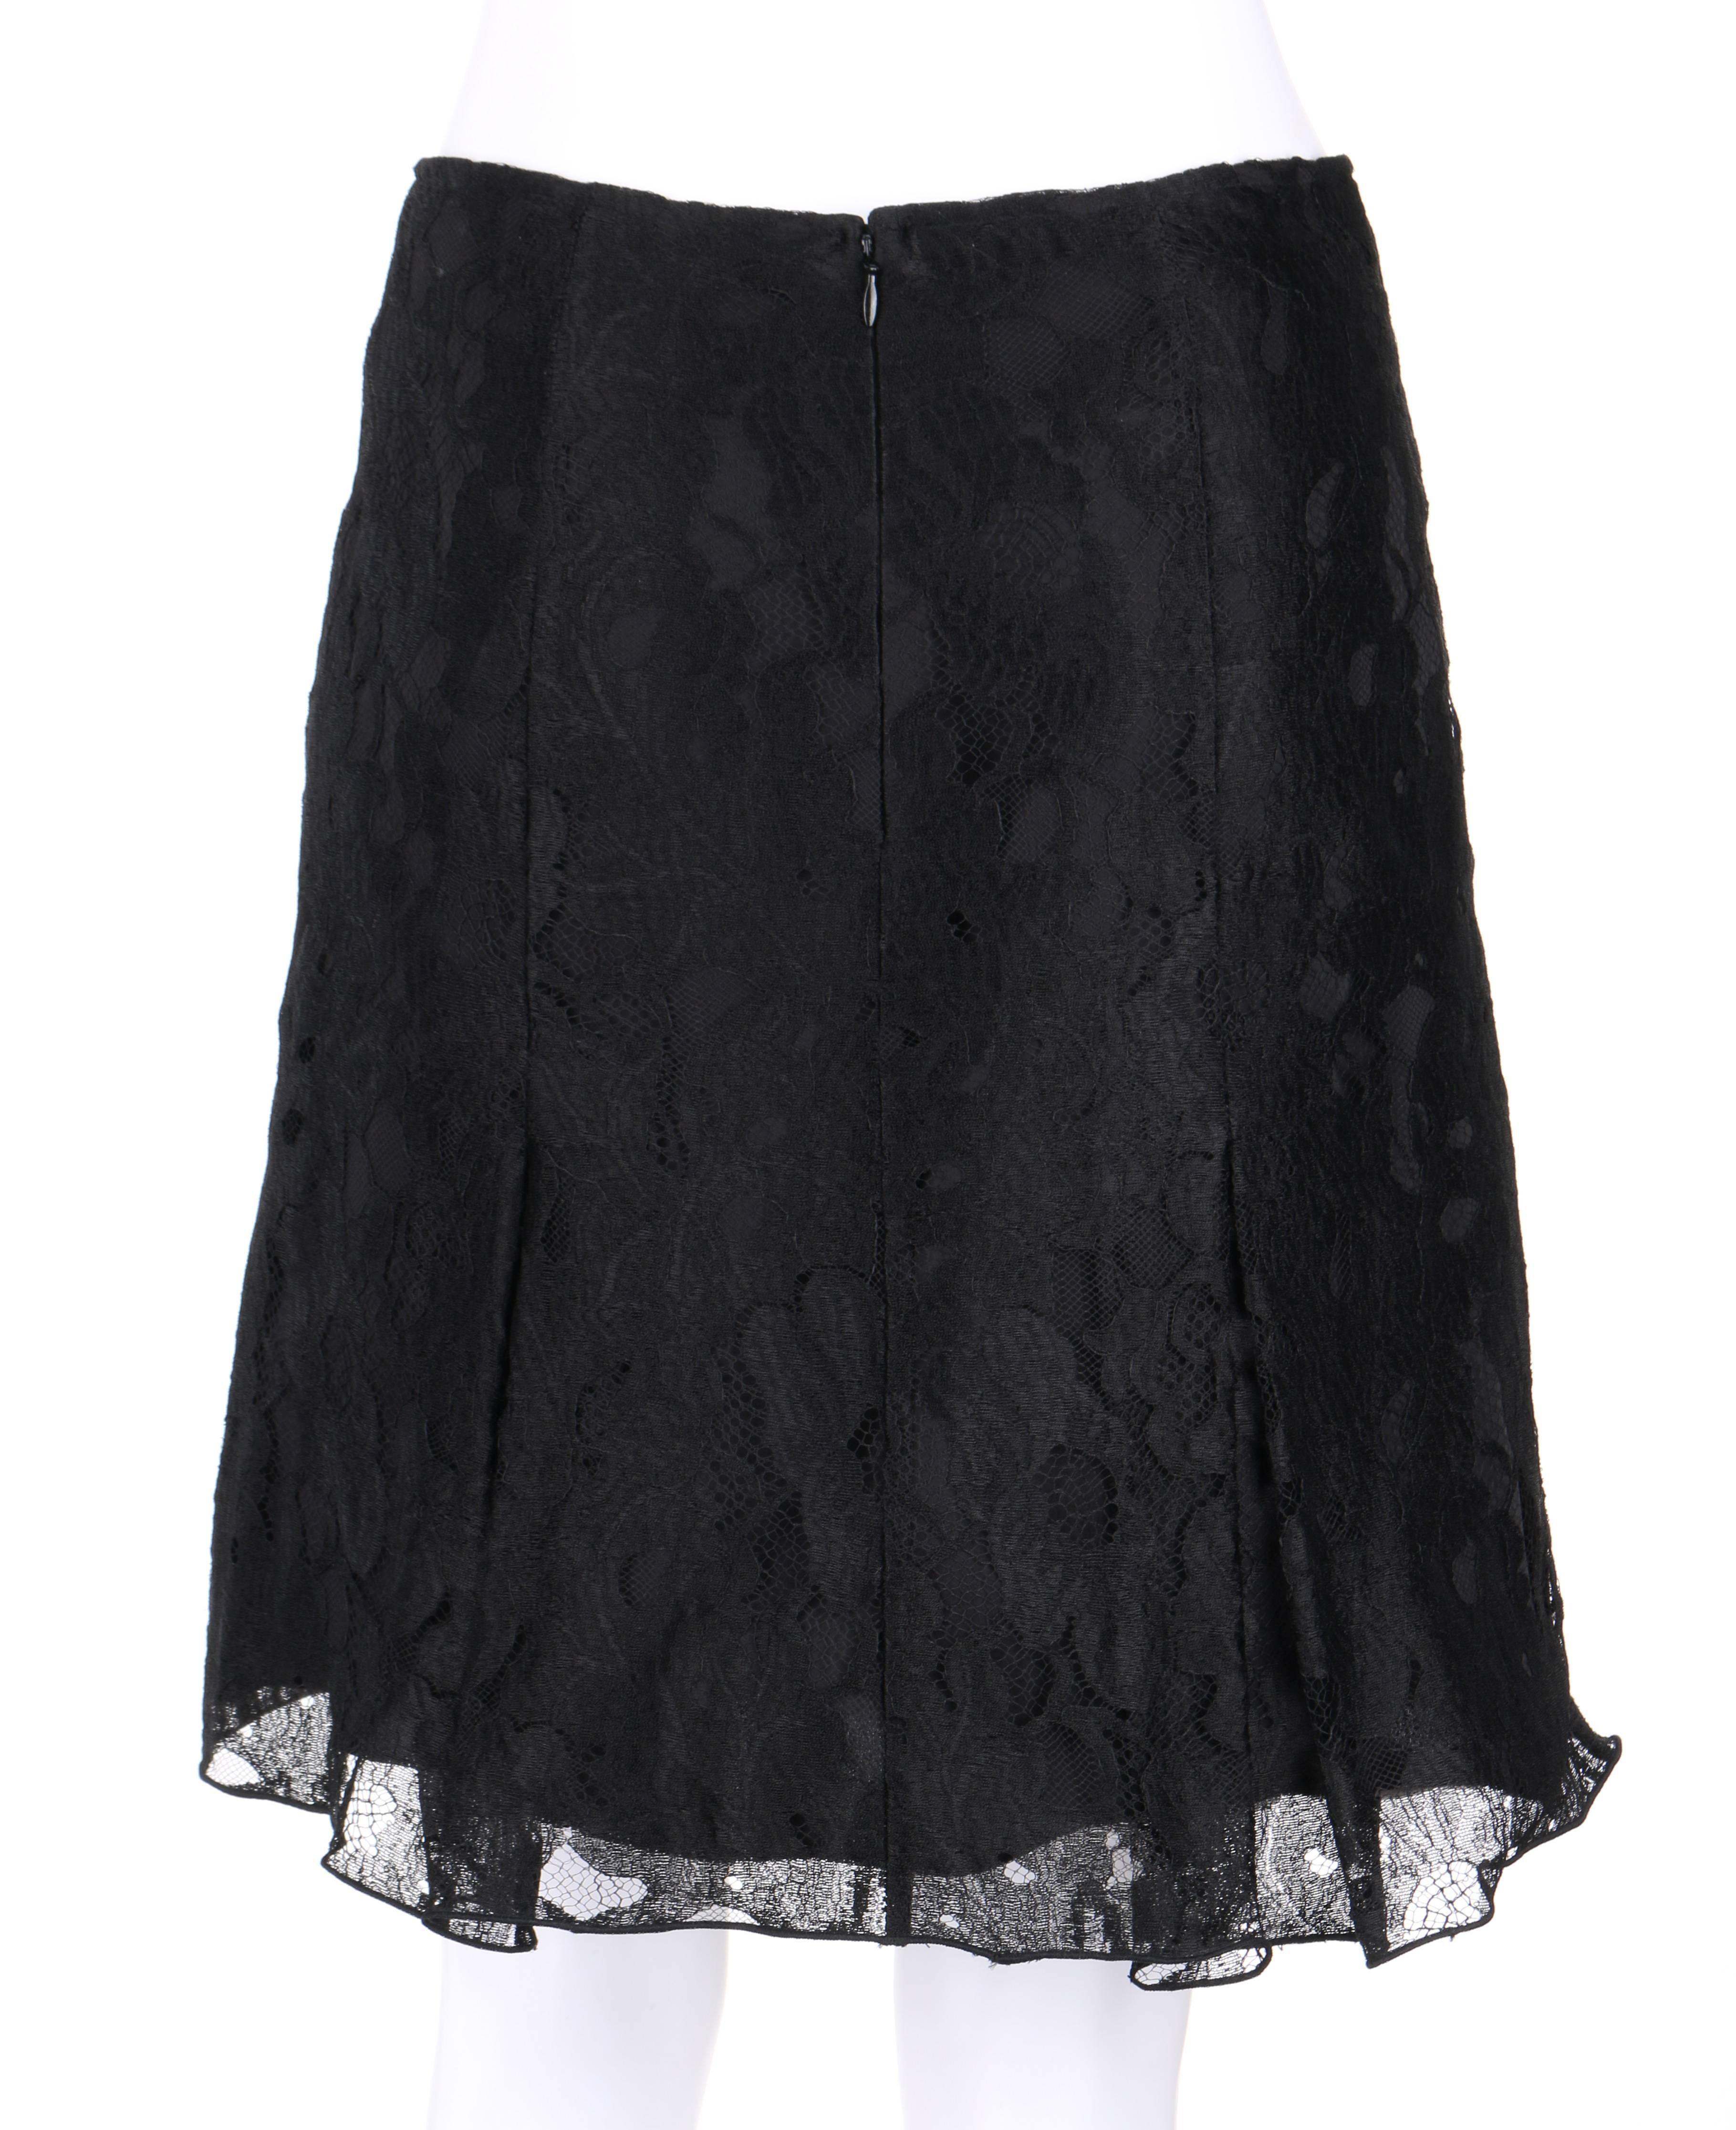 Women's CHANEL A/W 2006 Black Floral Lace Box Pleated Skirt 